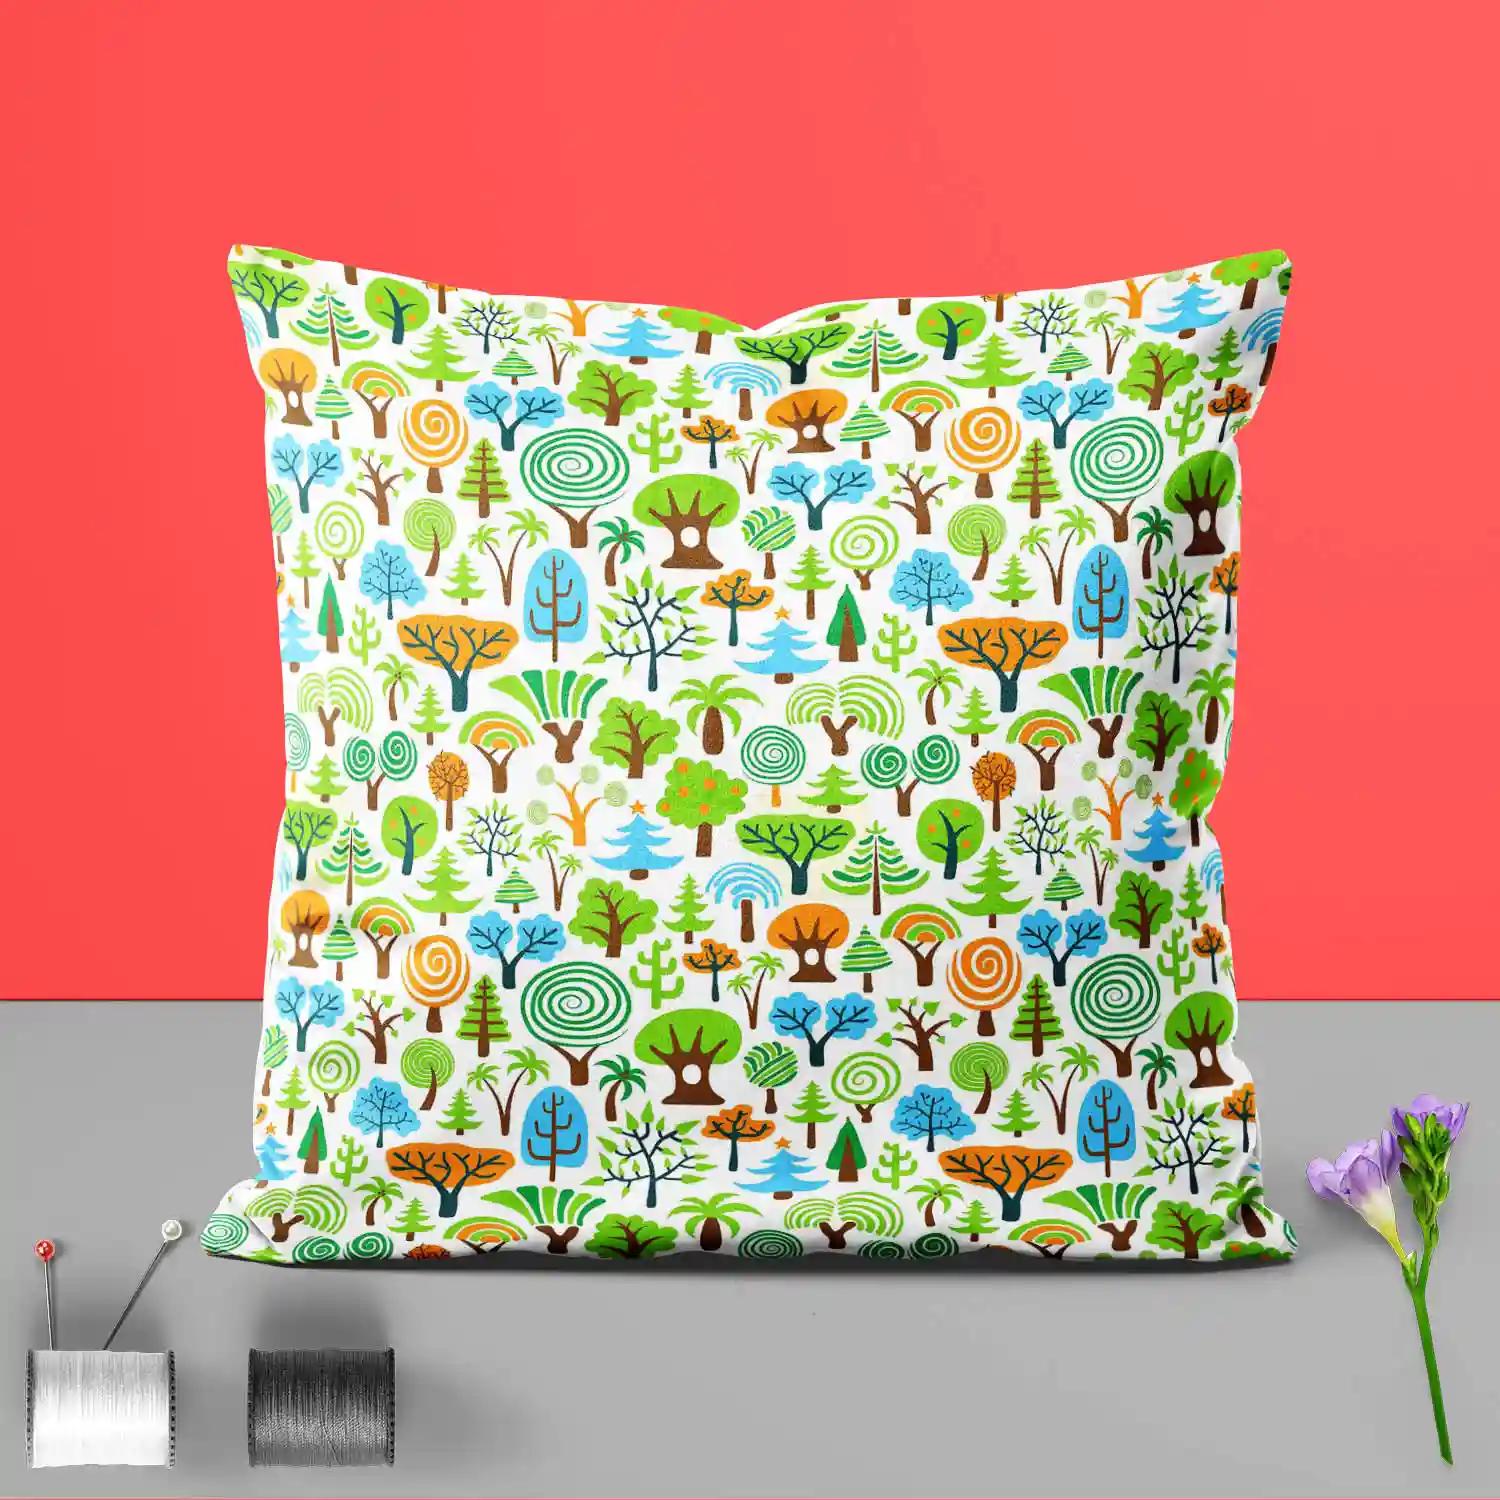 ArtzFolio Tree Collection | Decorative Cushion Cover for Bedroom & Living Room